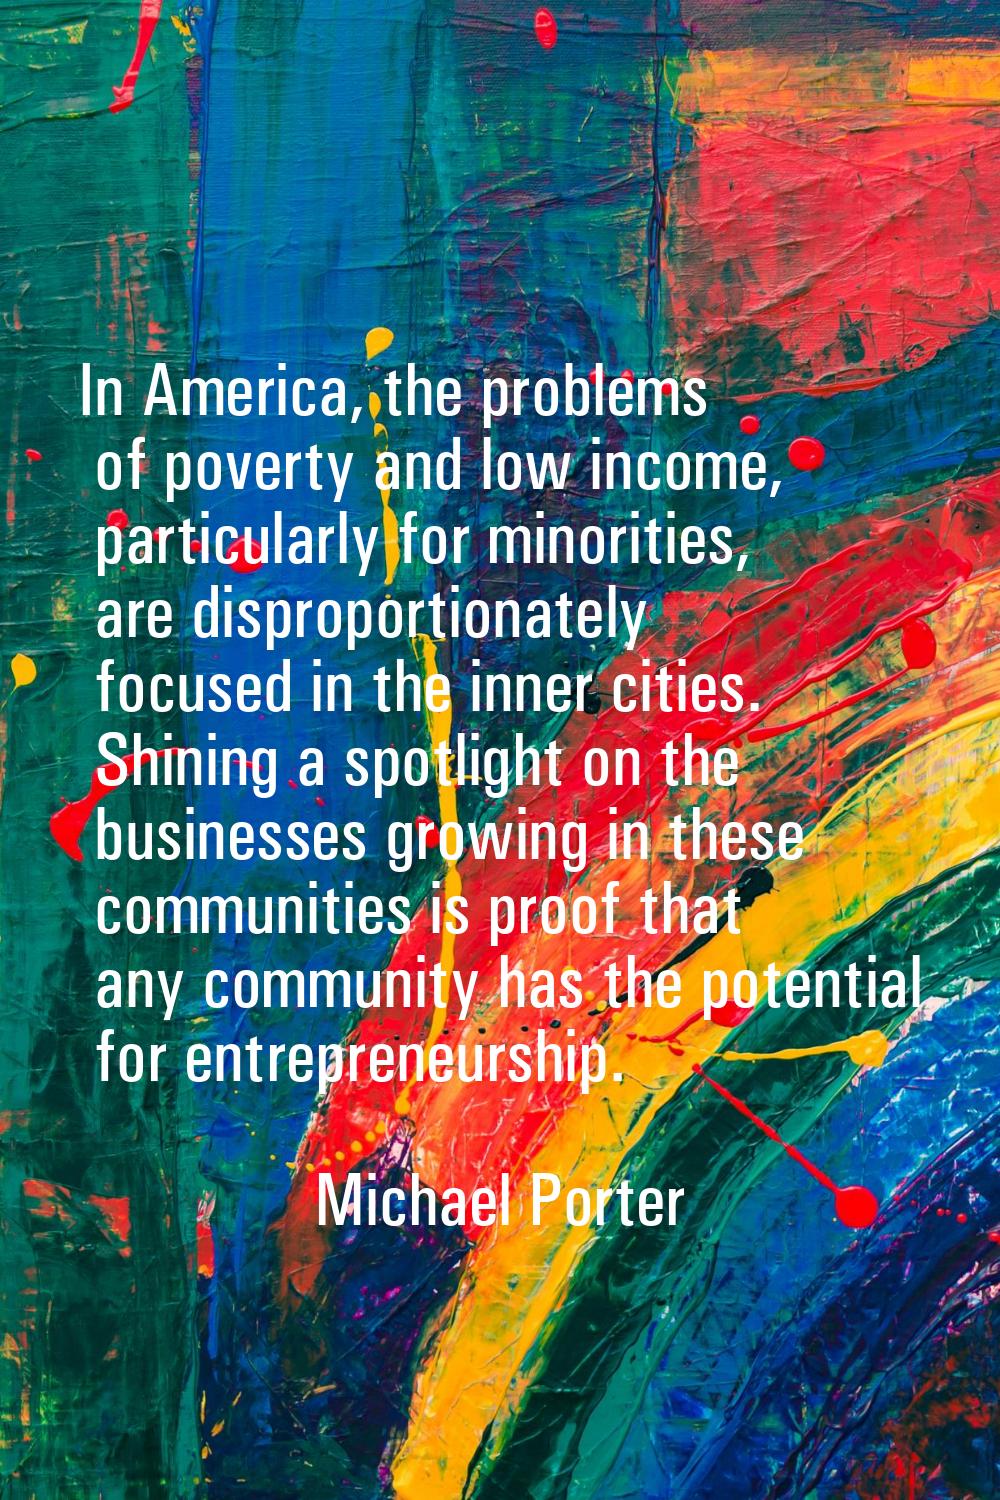 In America, the problems of poverty and low income, particularly for minorities, are disproportiona